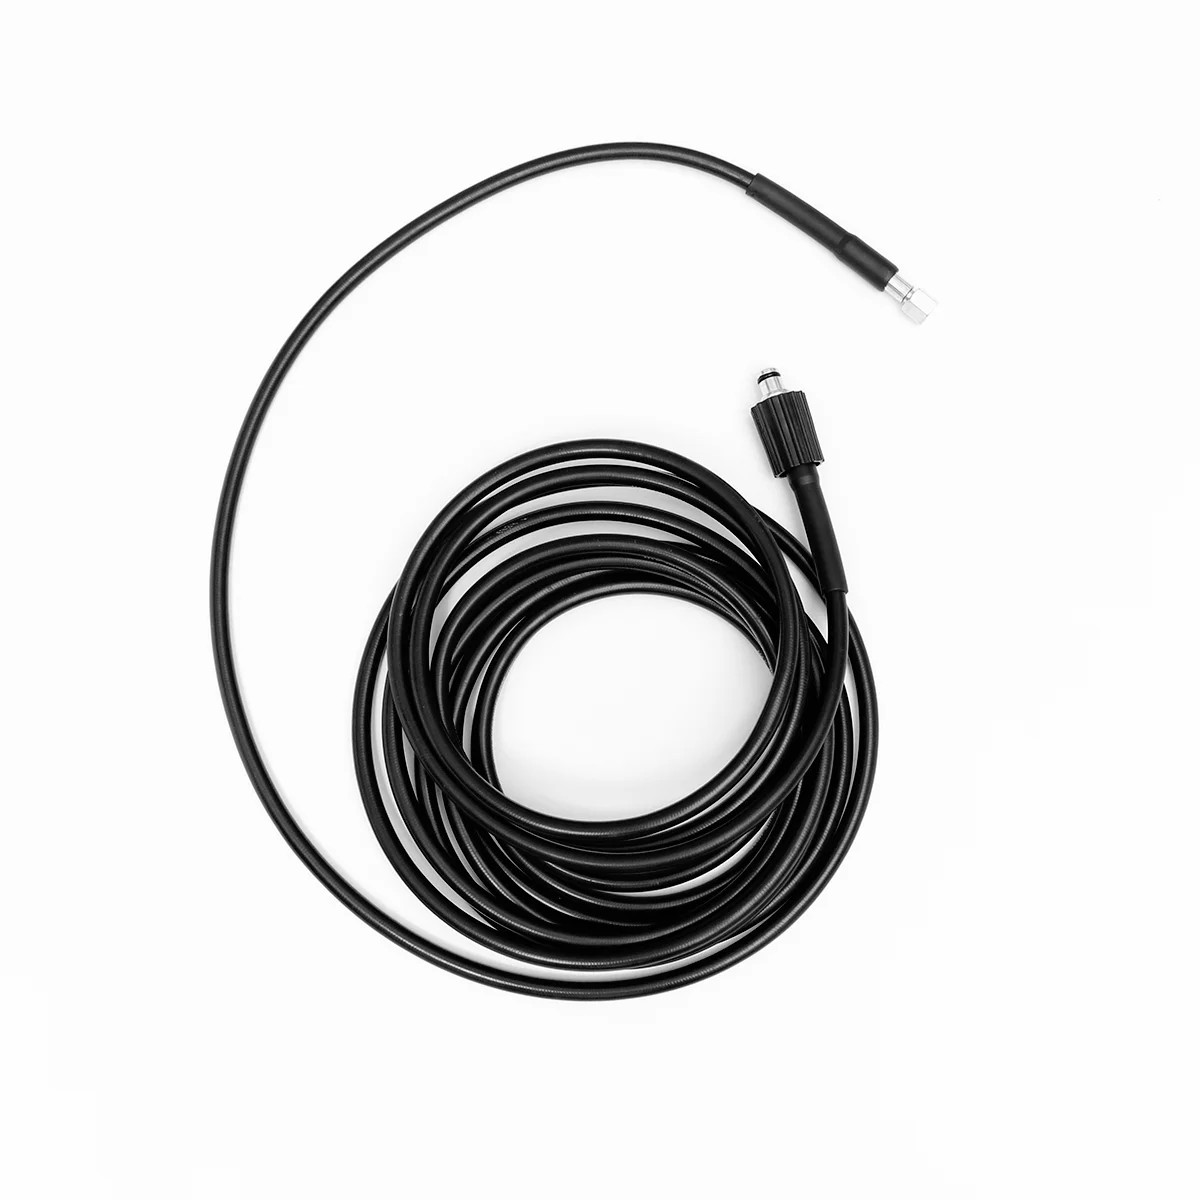 

Hose Washer Pressure Powerhighspray Water Wash Free Extension Kink Quick Connect Tube Sprayer Tensile Replacement Braided Wire